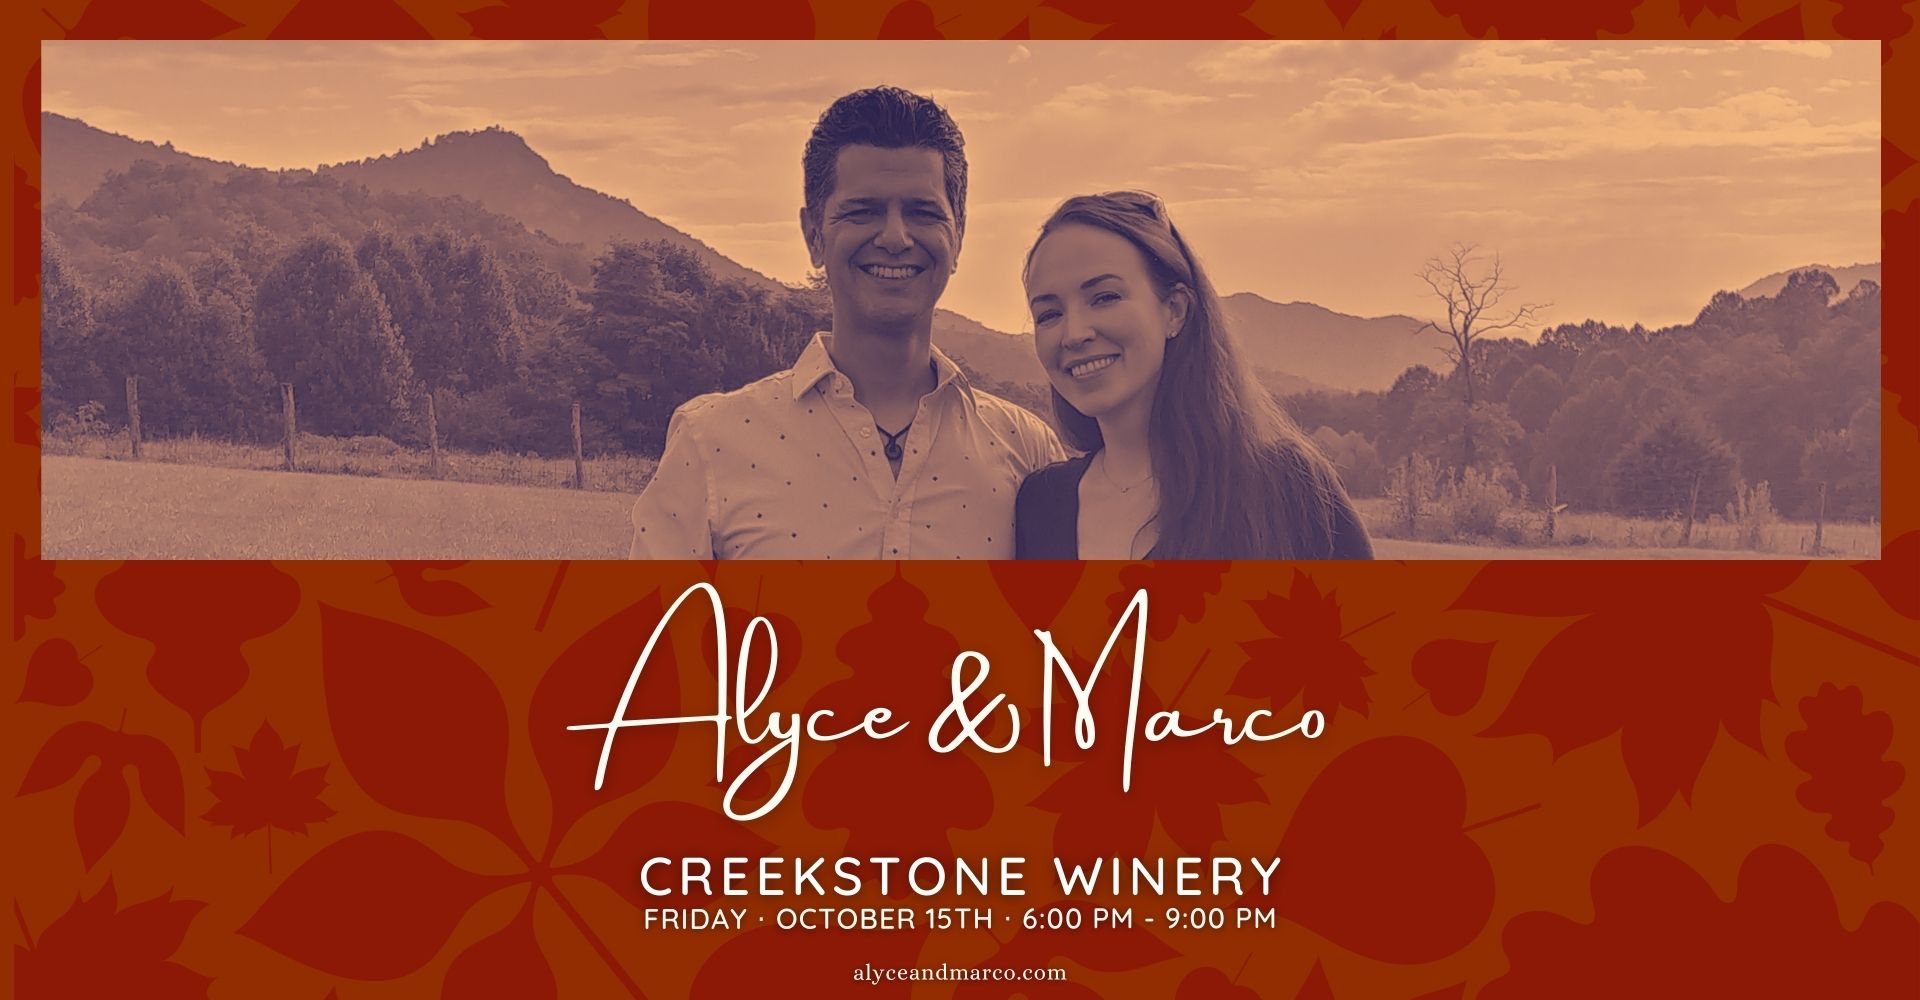 Alyce-and-Marco-Creekstone-Winery